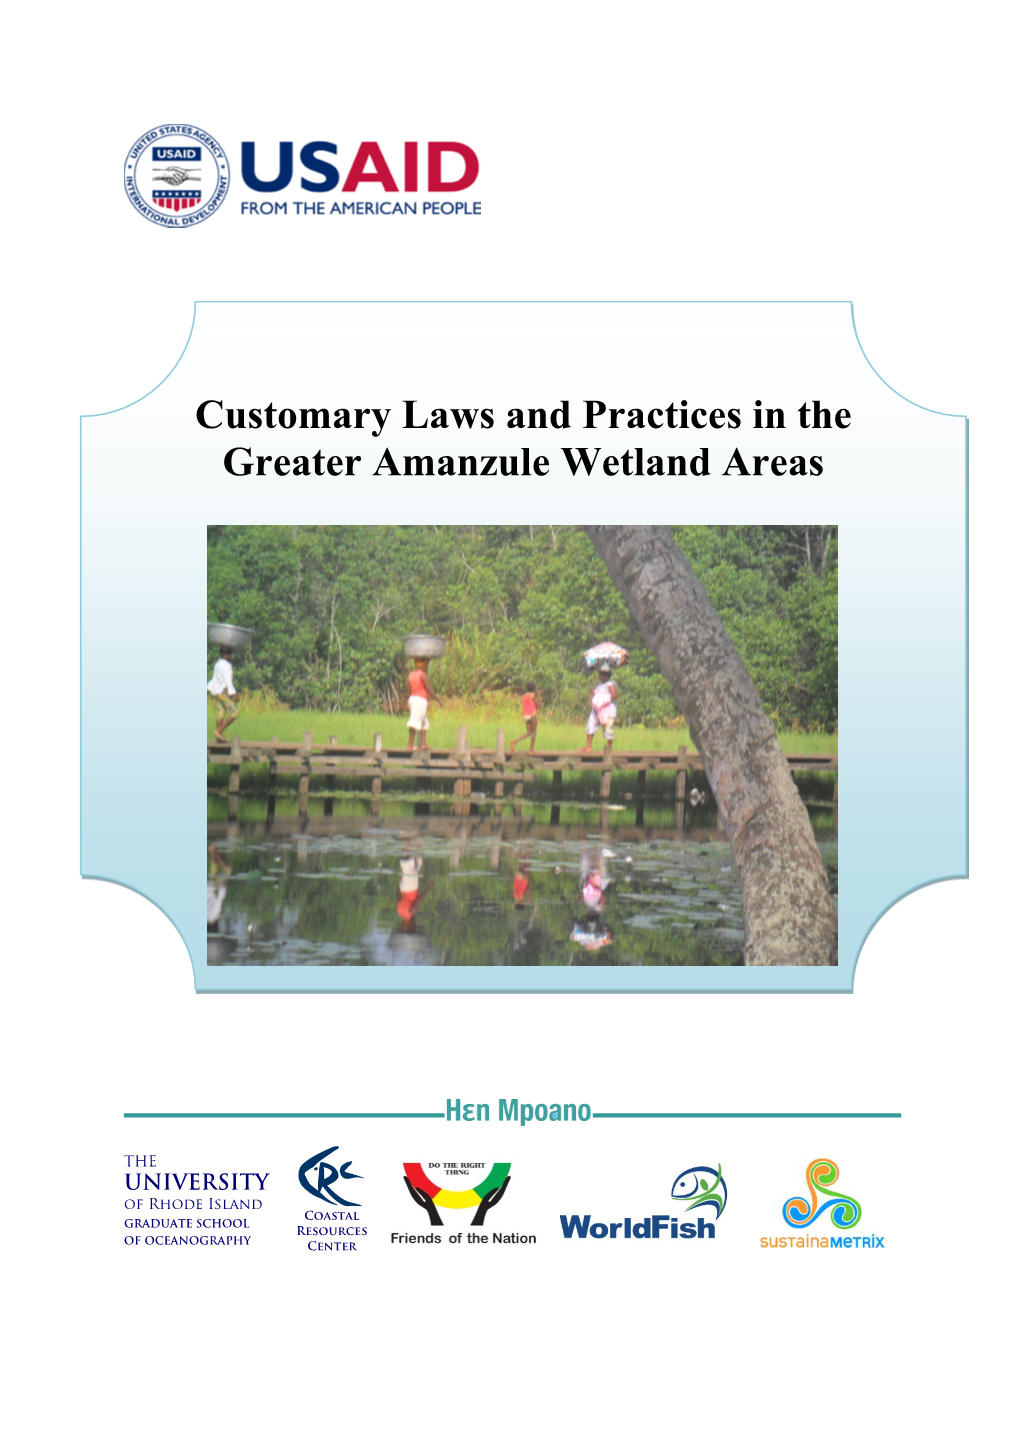 Customary Laws and Practices in the Greater Amanzule Wetland Areas